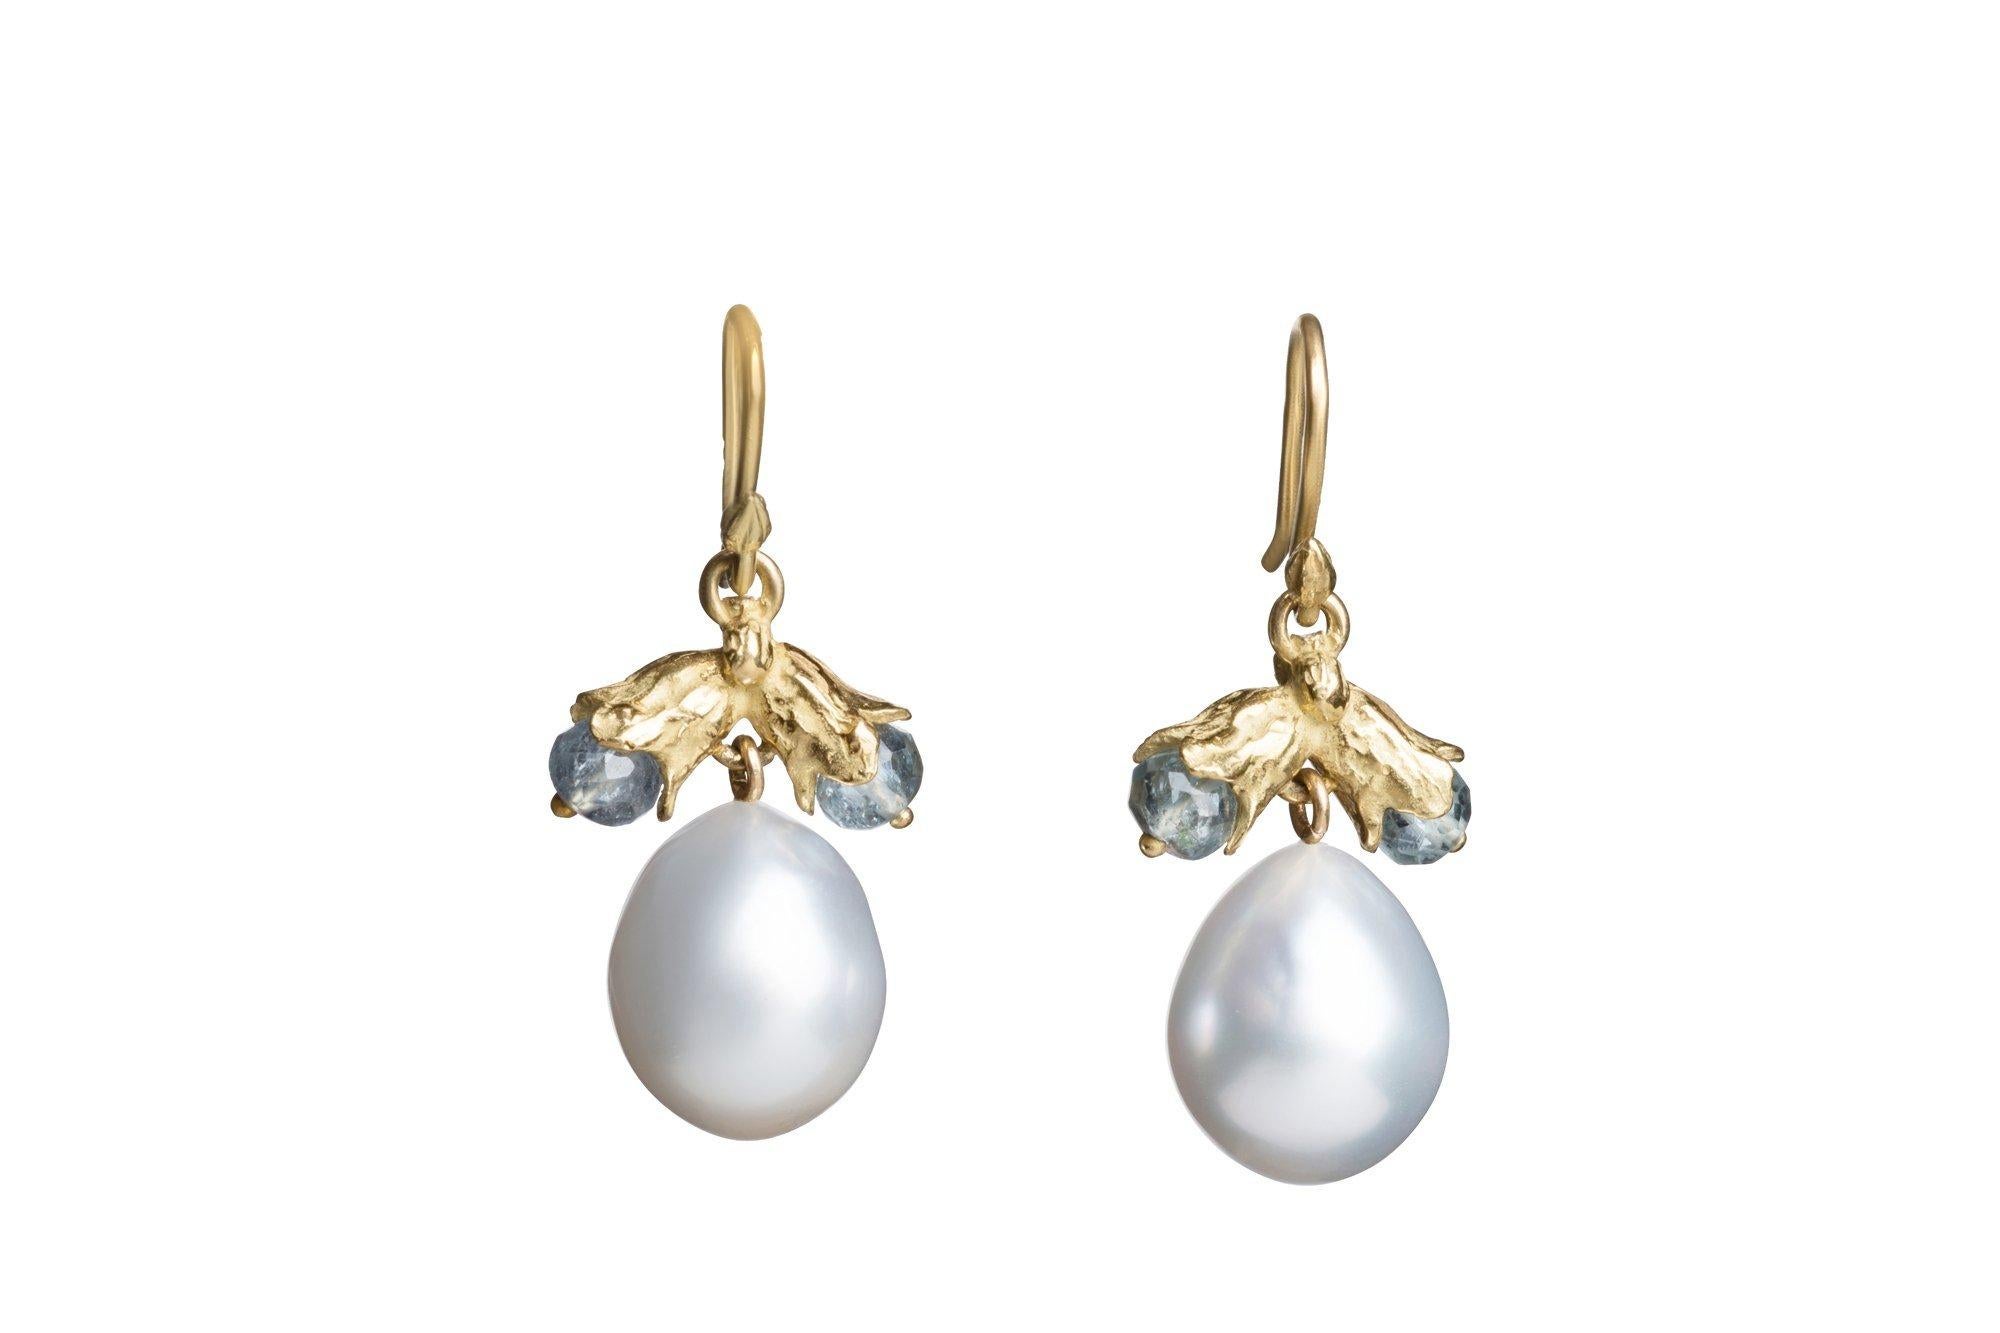 Tiny tourmaline-studded bluebells float above slightly mismatched, stormy blue-gray South Sea pearl drops, making for a stunning and truly original pair of dangle earrings. Are you an original? These are for you.